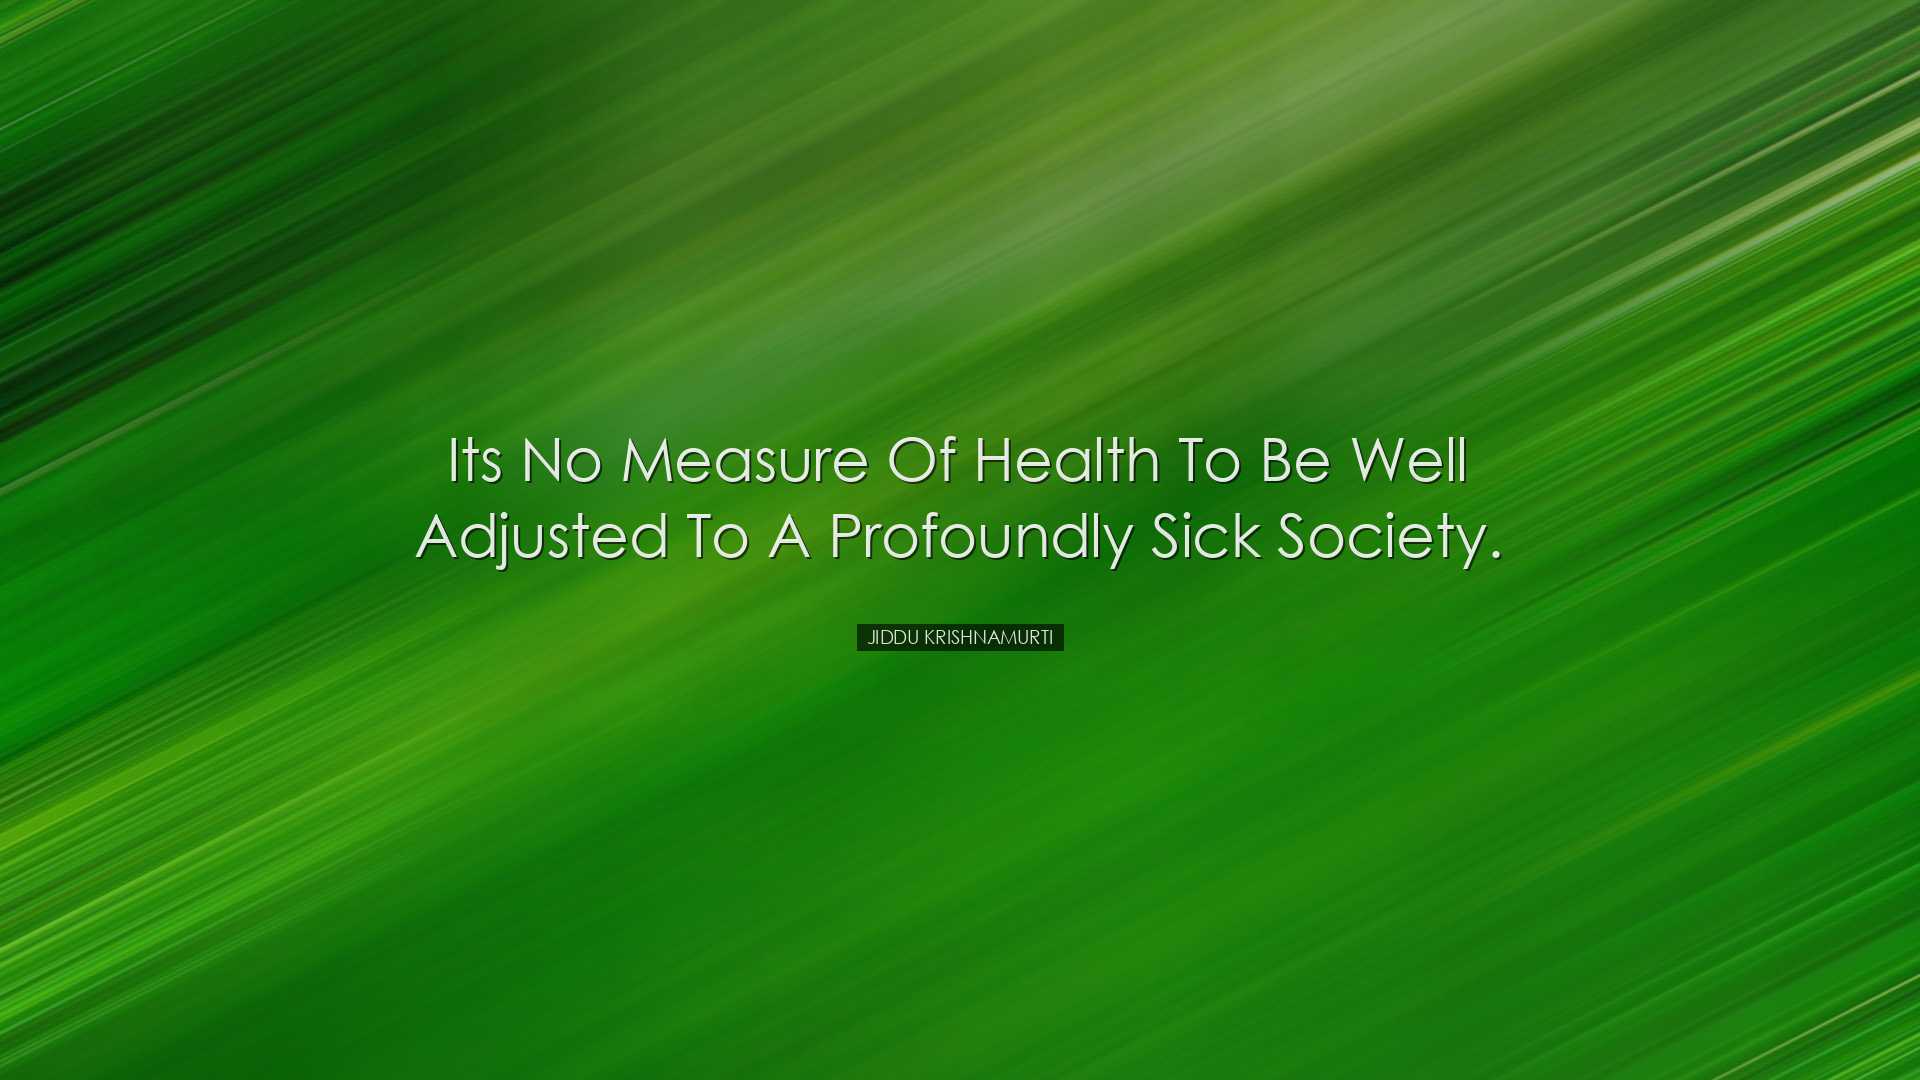 Its no measure of health to be well adjusted to a profoundly sick